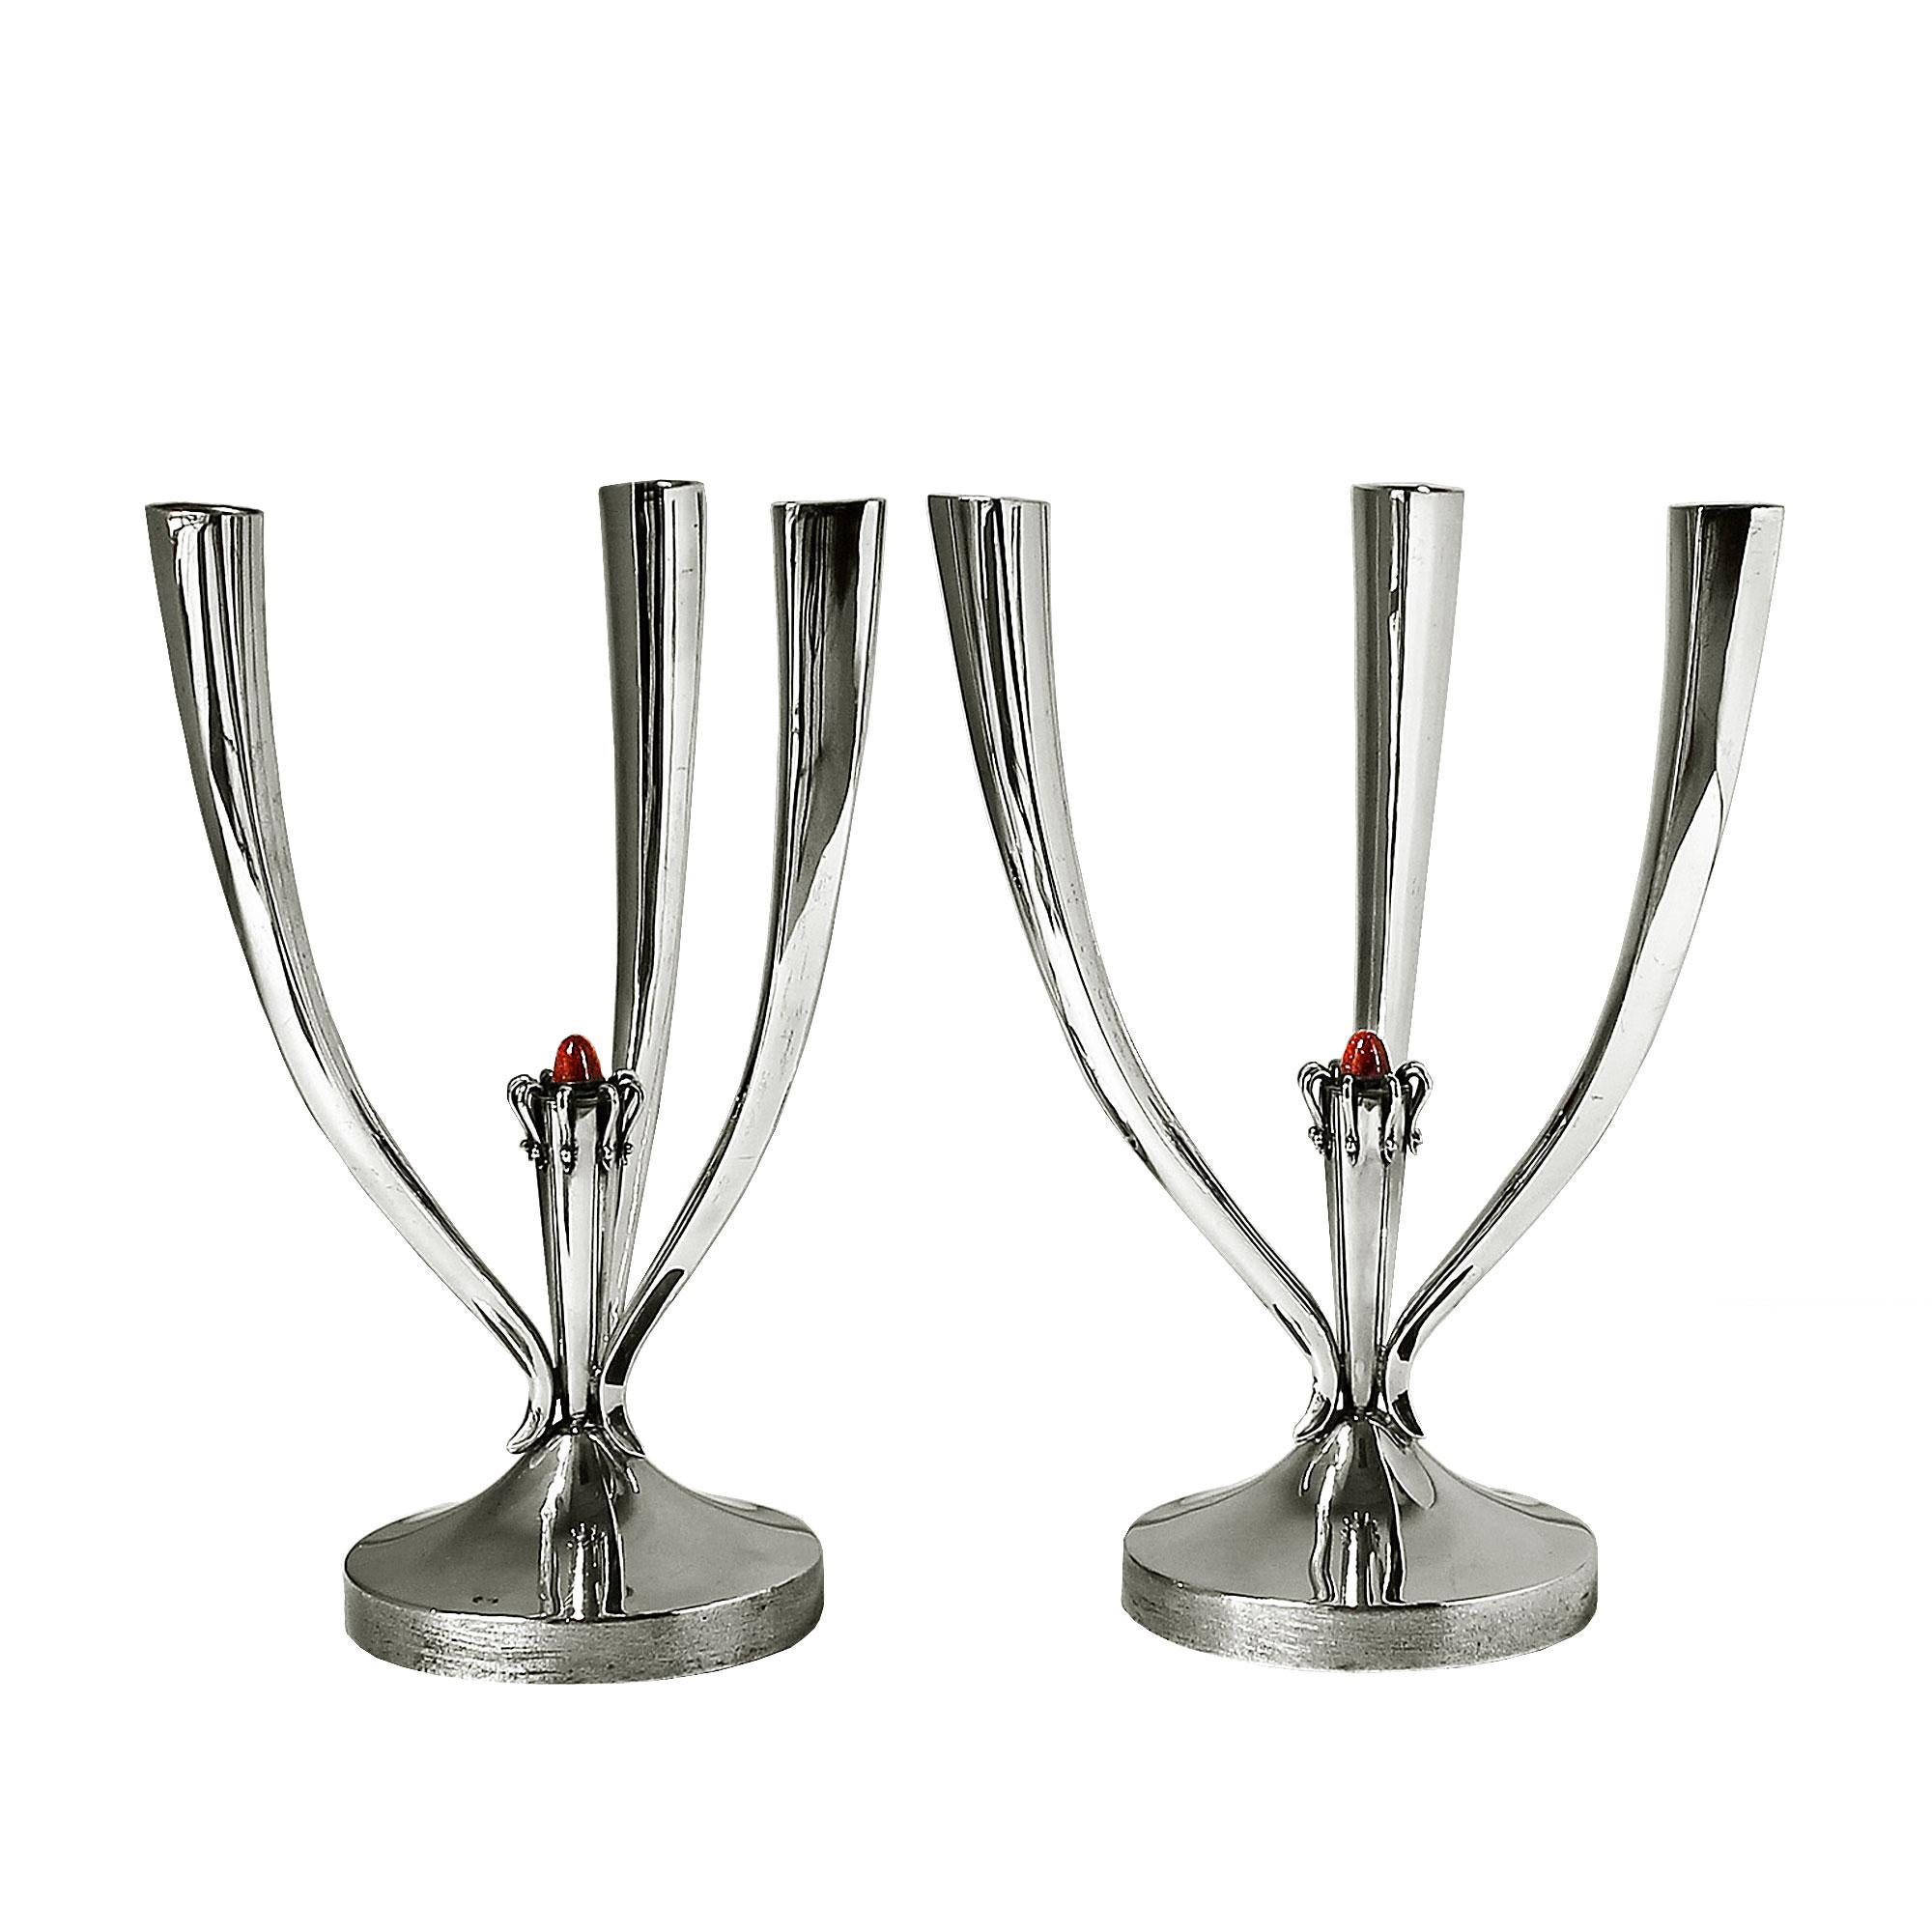 Pair of candelabras, sterling silver, three branches, central red enameled cabochon, weight on base.
Stamps: Star and illegible, M on base.
Star stamp is for sterling silver in Spain since 1934.
Weight: 547 grms each
Spain, Barcelona, circa 1950.